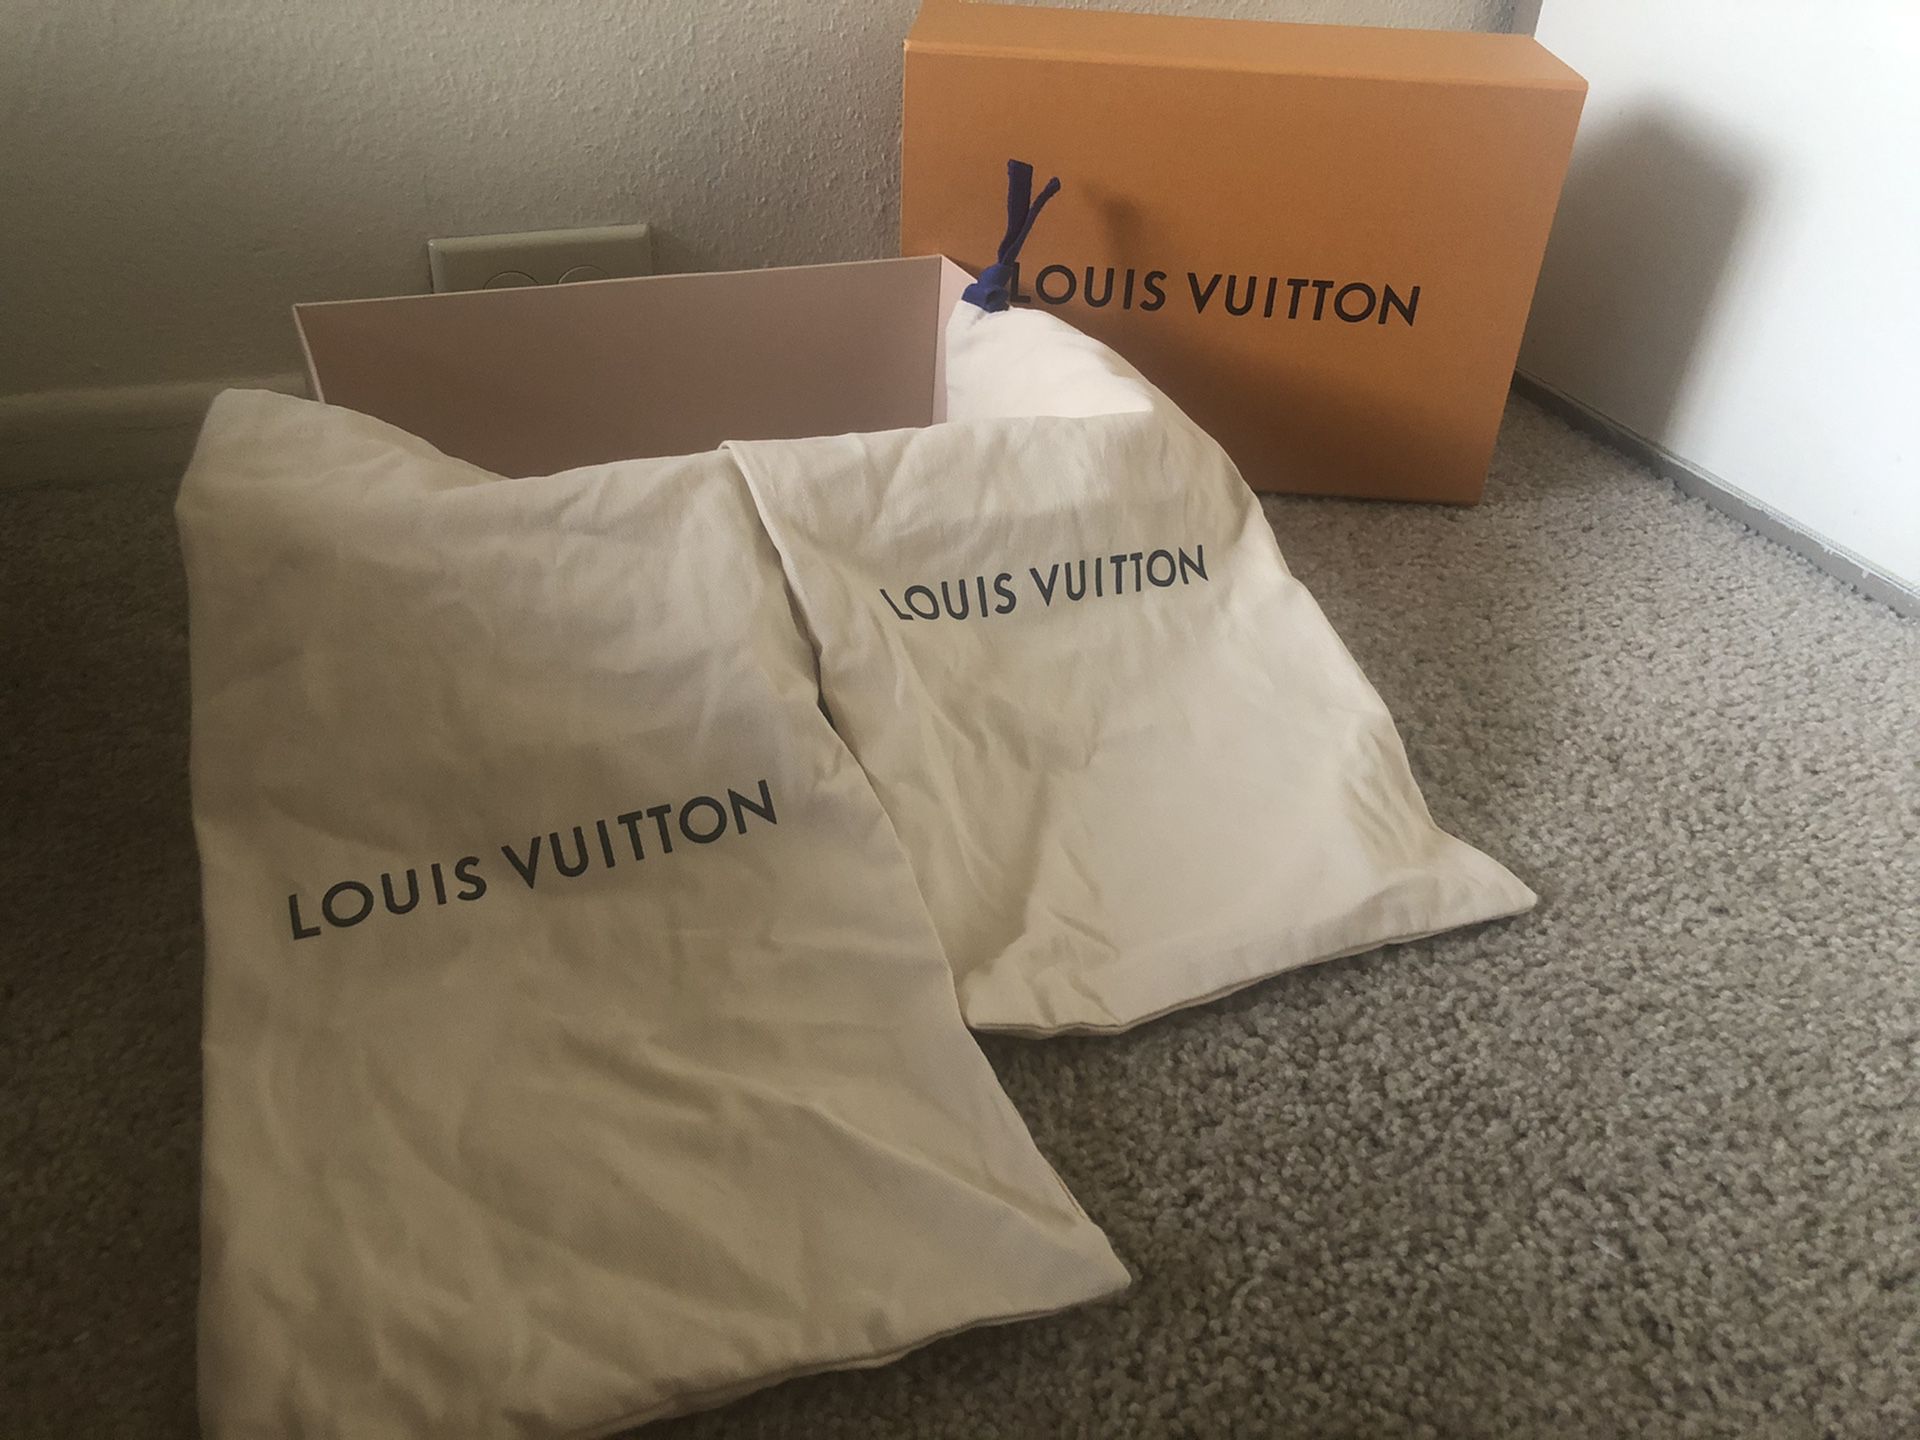 Authentic Louis Vuitton empty shoes box for Sale in Woodland Hills